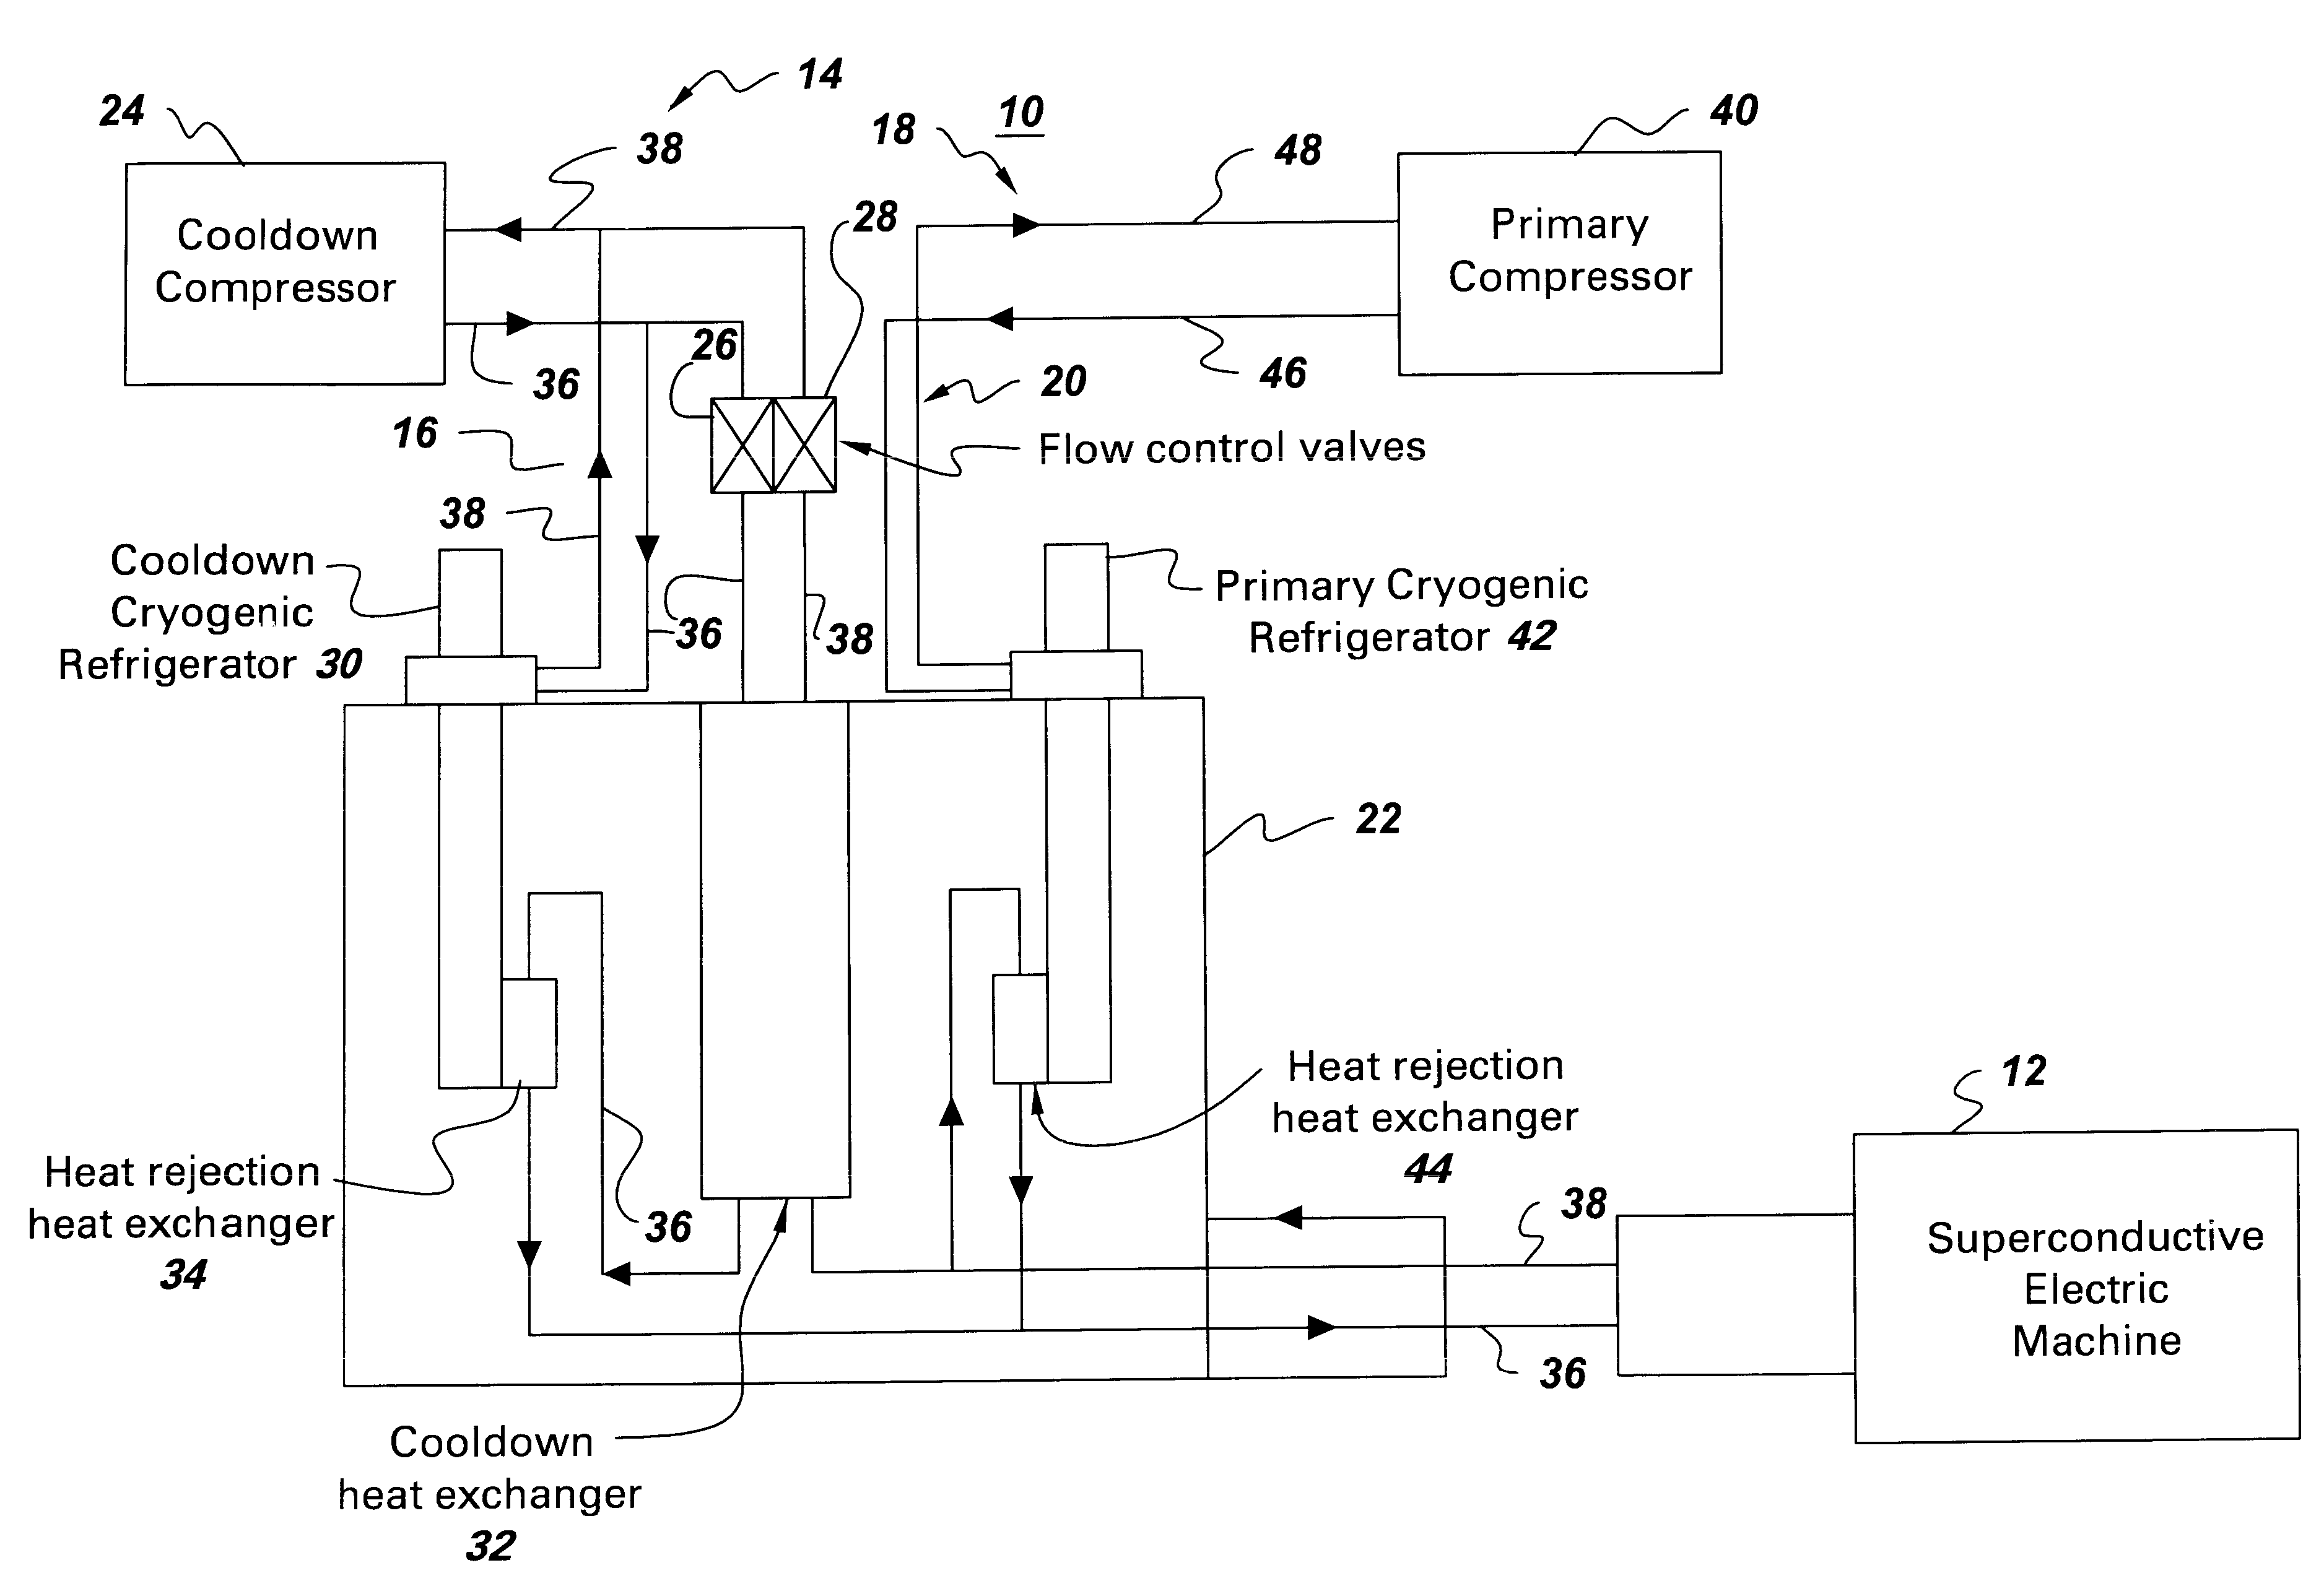 Cryogenic cooling system with cooldown and normal modes of operation